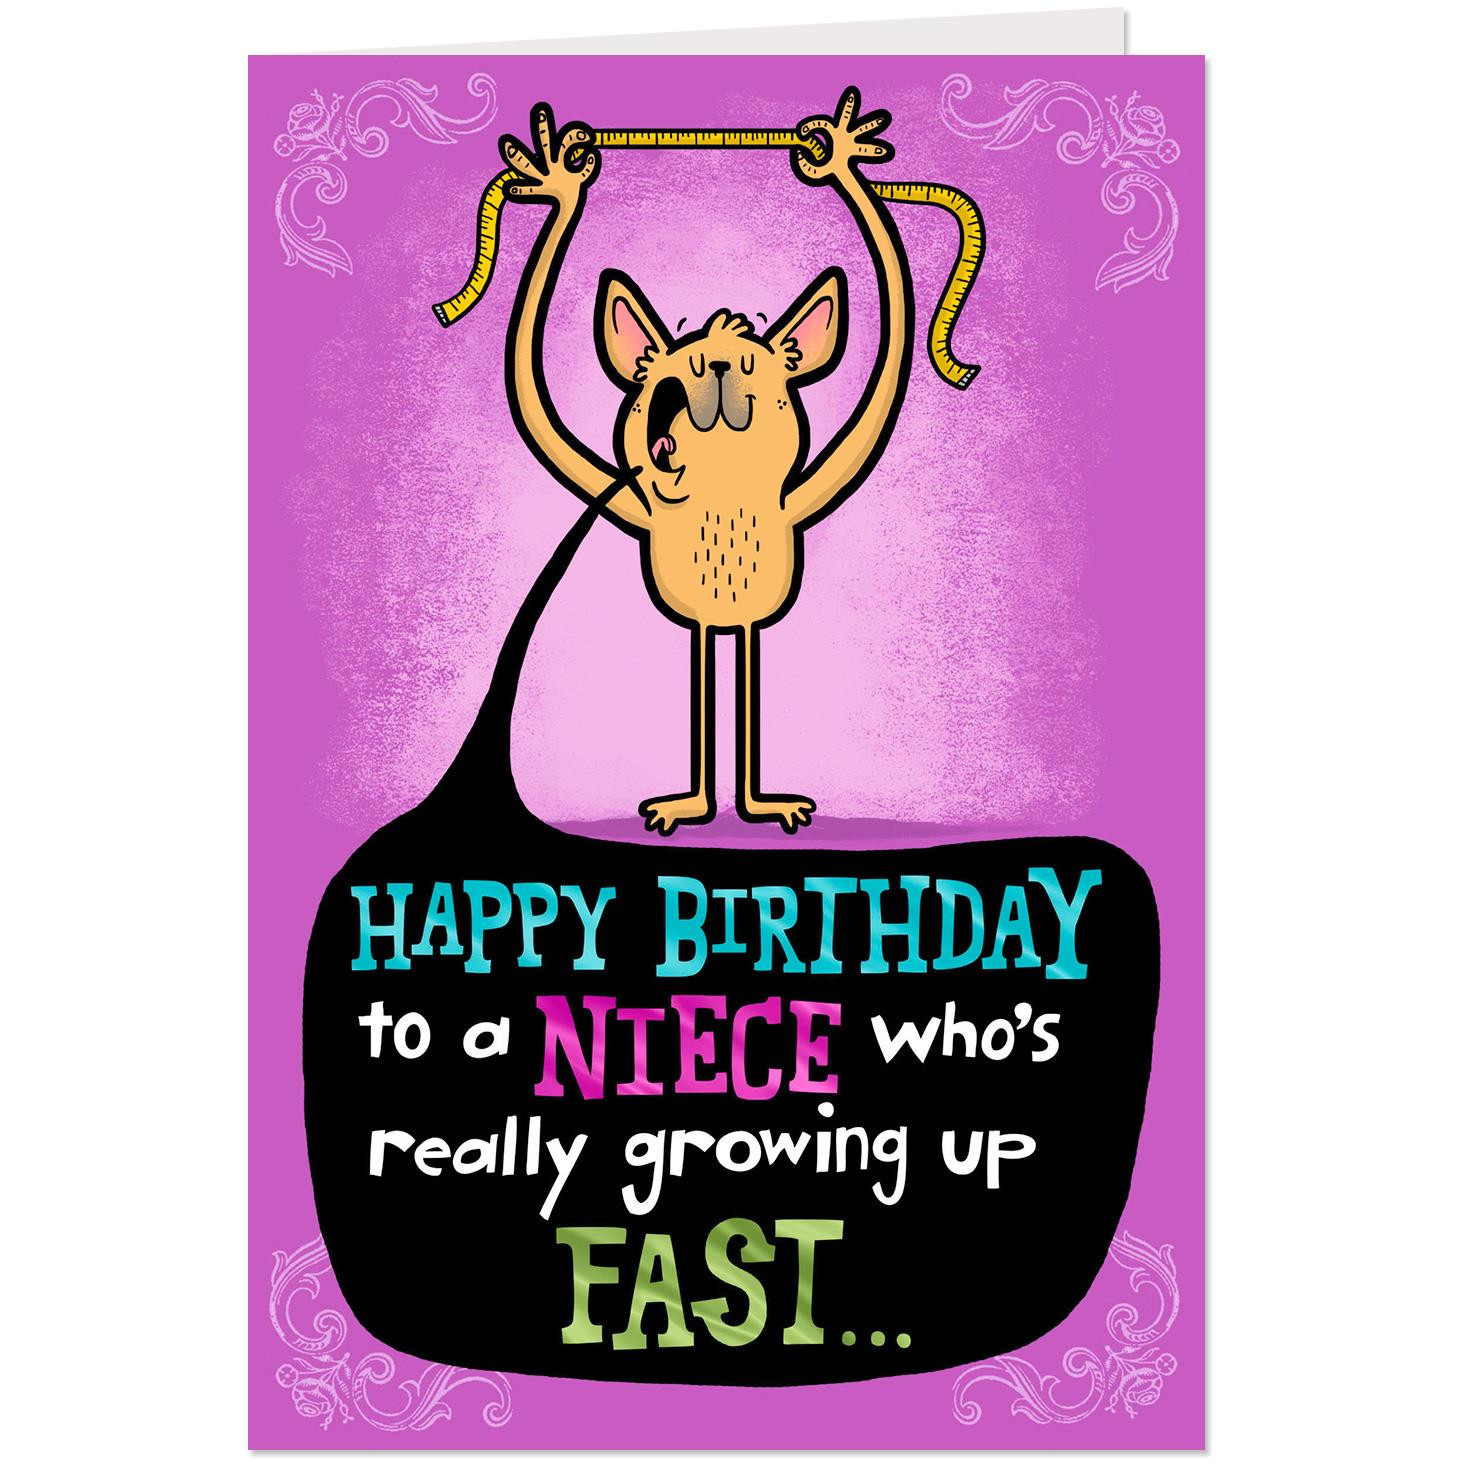 Birthday Cards Funny For Her
 You re Growing Up Fast Funny Birthday Card for Niece